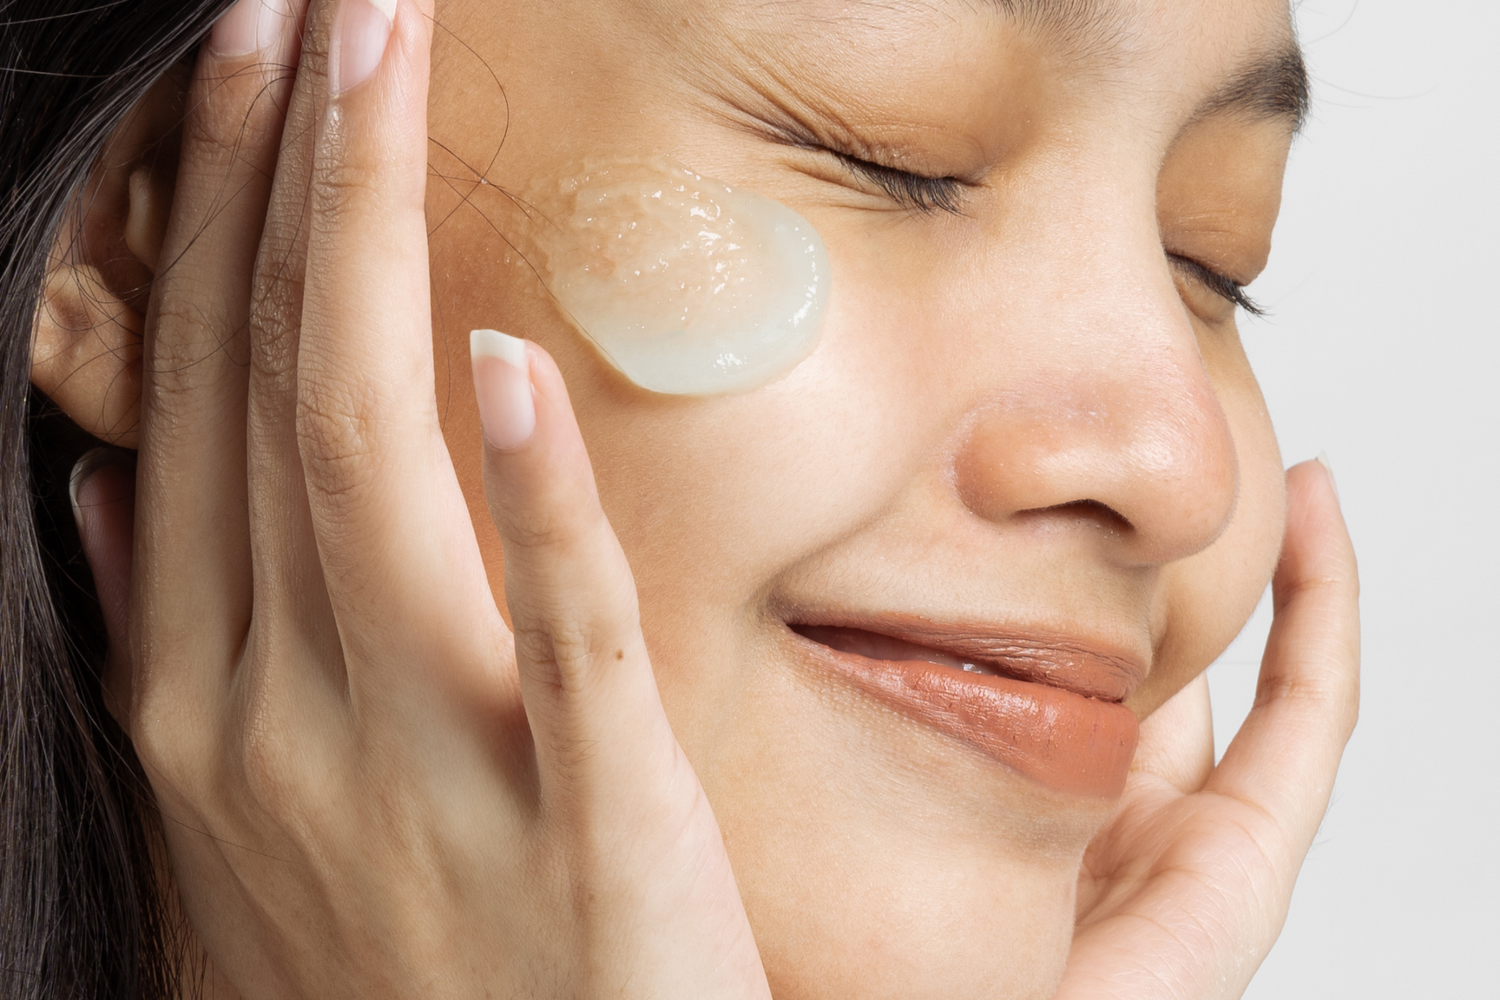 Hydrate vs Moisturize: What Your Skin Needs